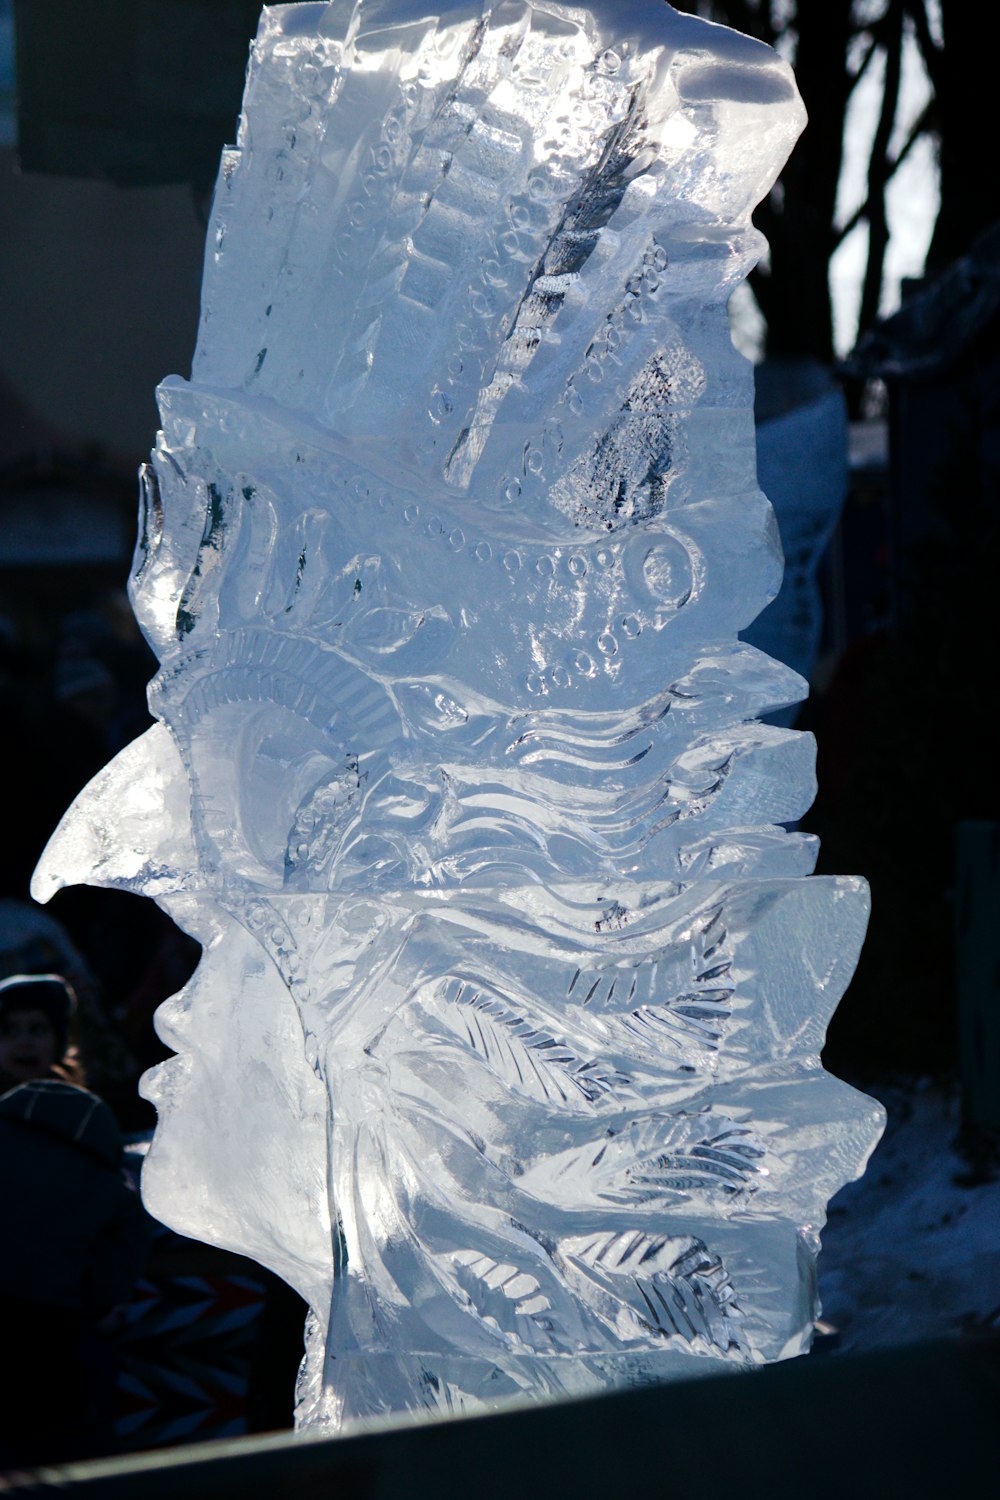 a large ice sculpture of a woman's face